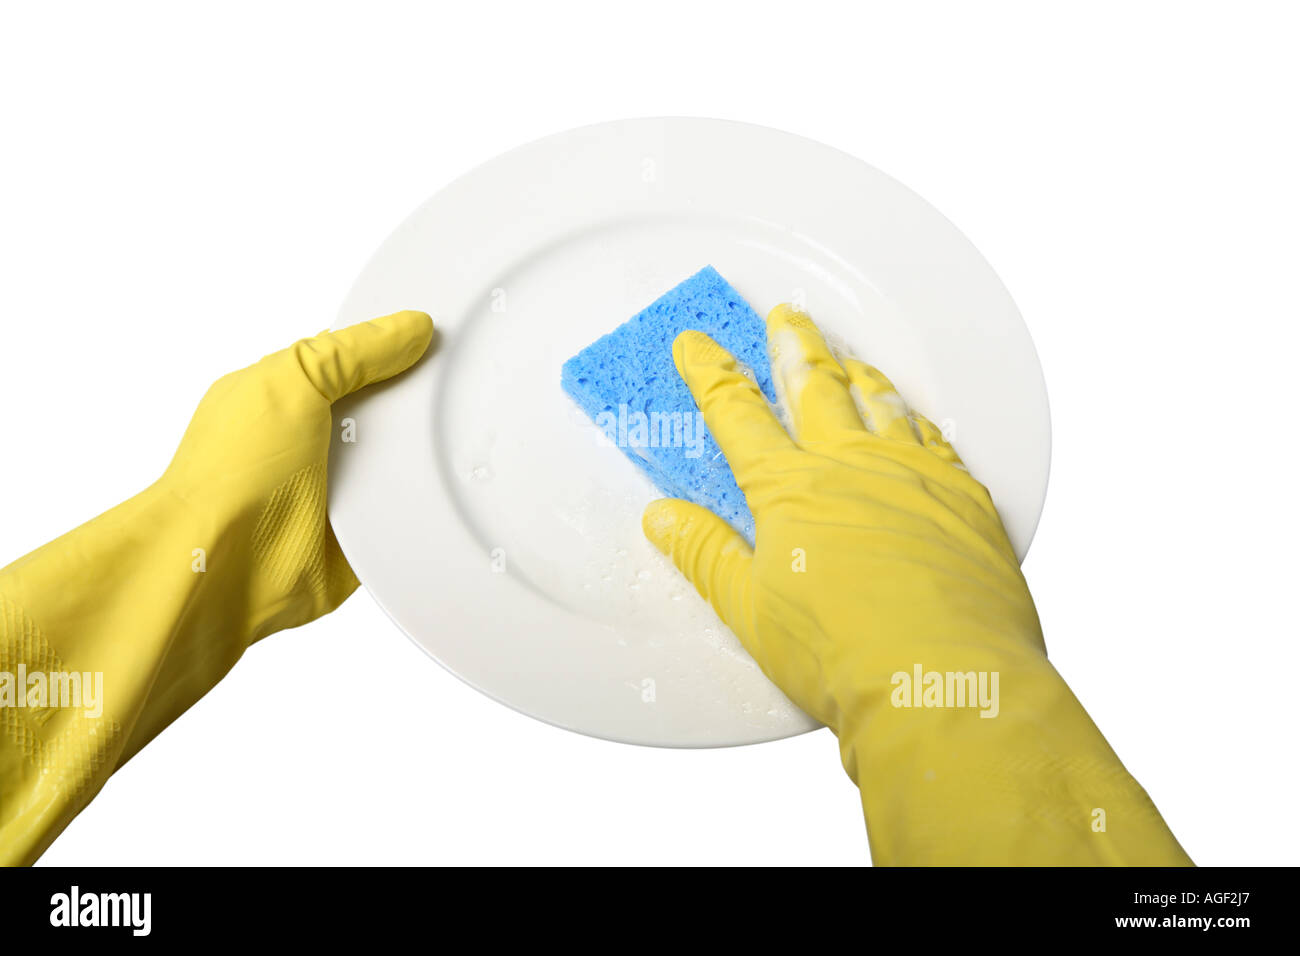 Hands in Rubber Gloves Washing Plate Stock Photo